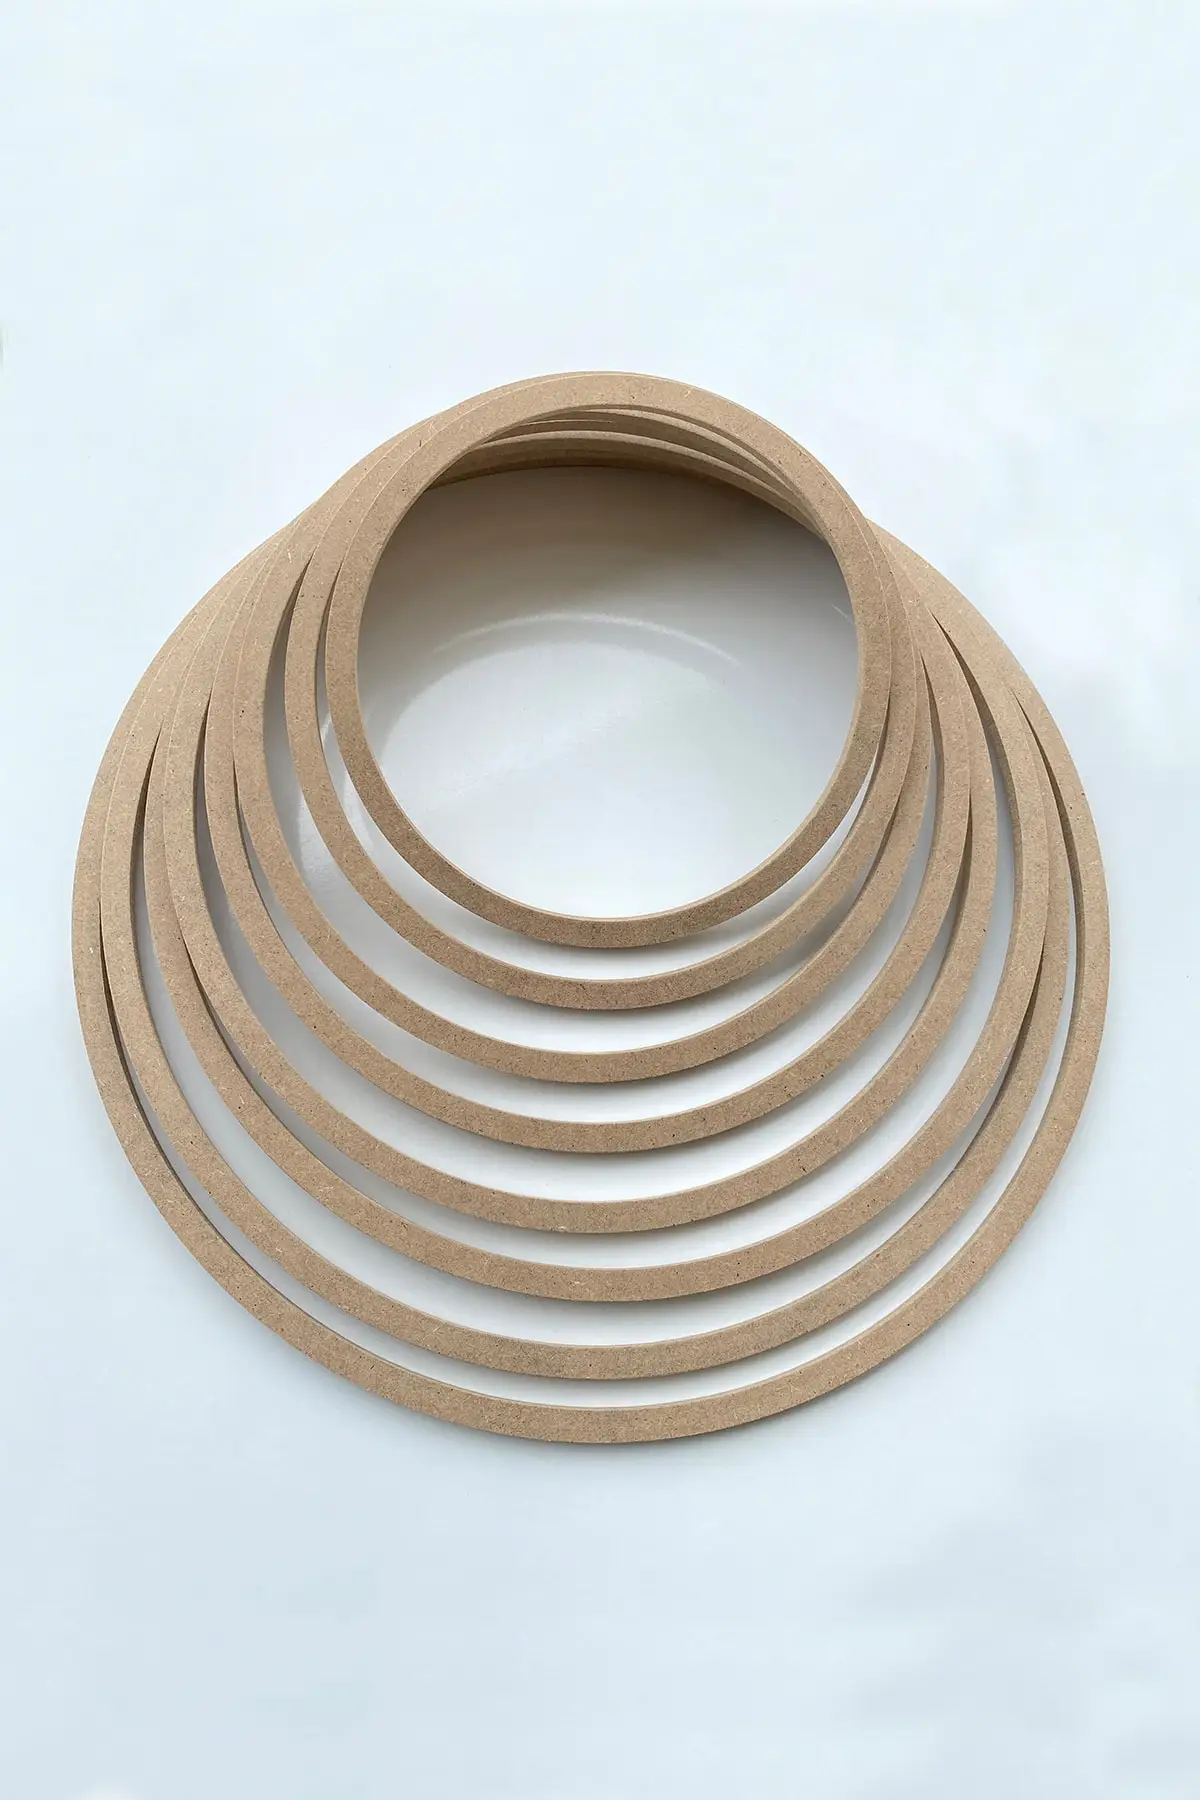 

Raw Mdf 30 Cm 8 Different Pieces Screwless Pulley Macrame Ring Dreamcatcher Round Circle Quality Material Hobby Wood Equipments